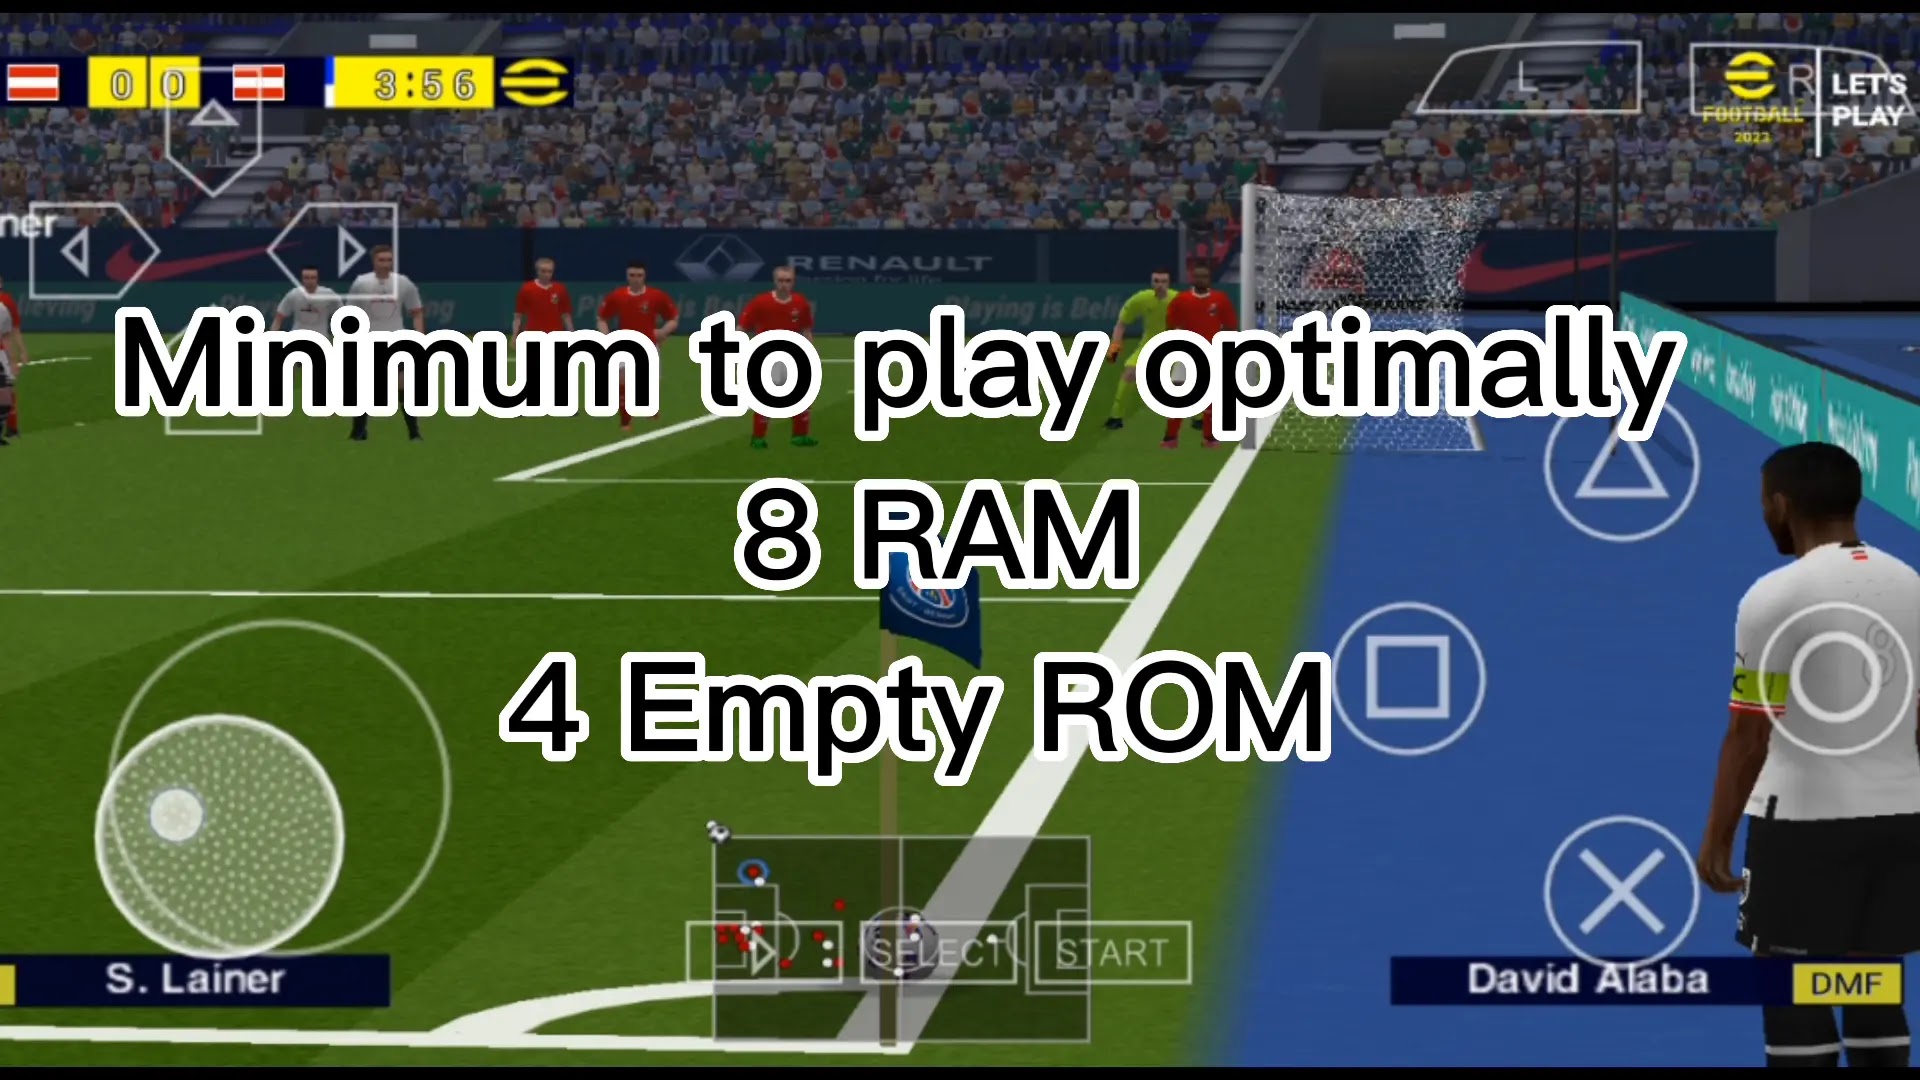 eFOOTBALL PES 23 PPSSPP, PES 2023 PPSSPP CAMERA PS5